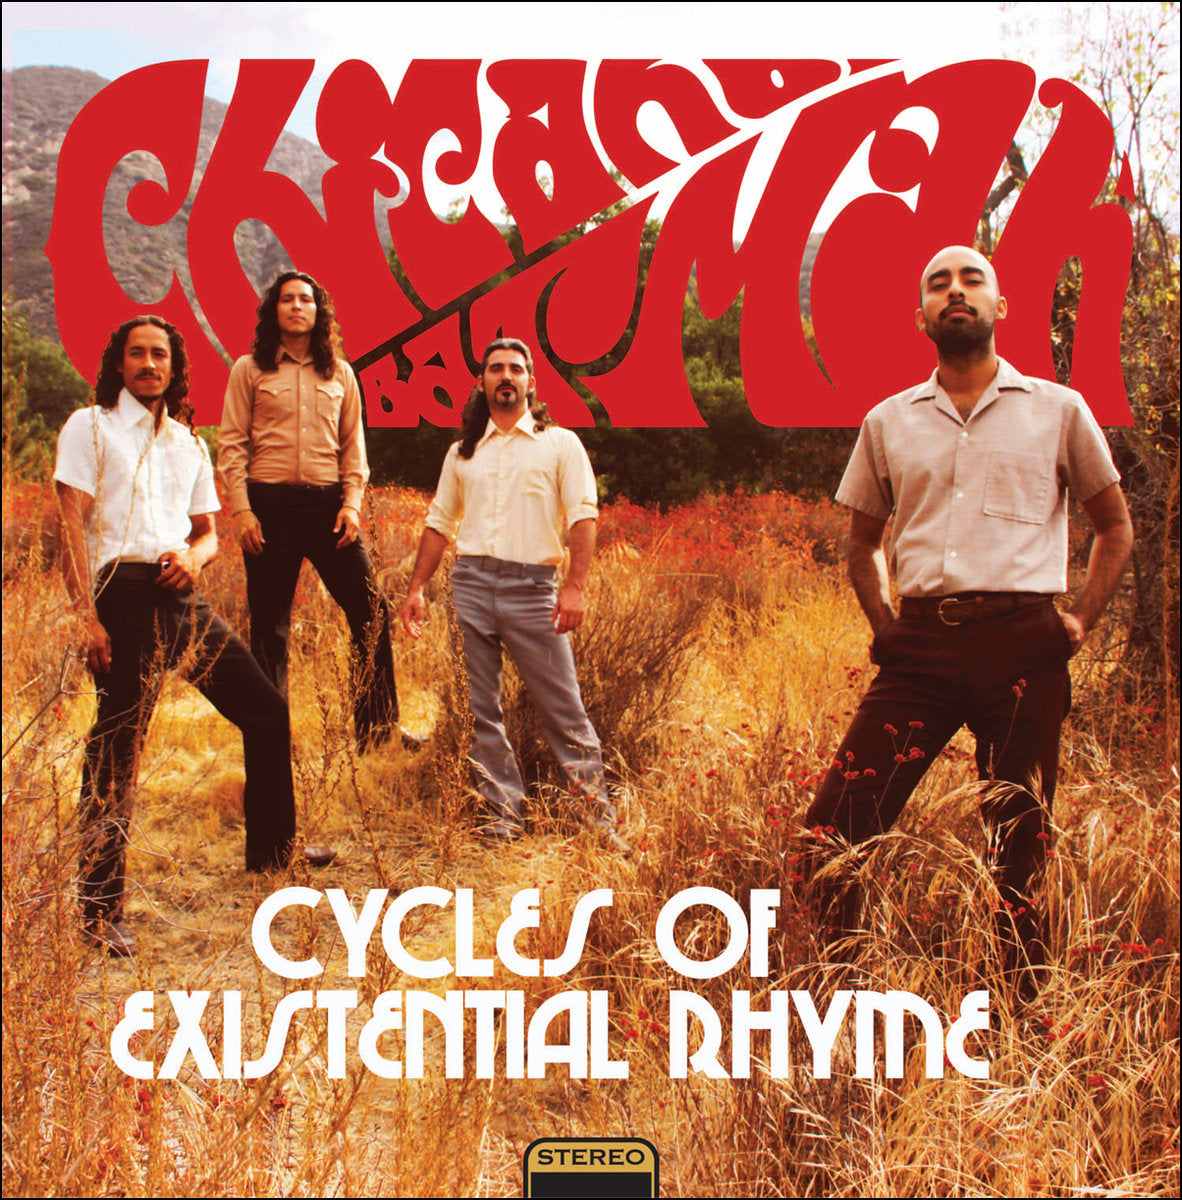 Chicano Batman - Cycles Of Existential Rhyme - New Lp Record 2018 USA Vinyl - Psychedelic Rock / Cumbia